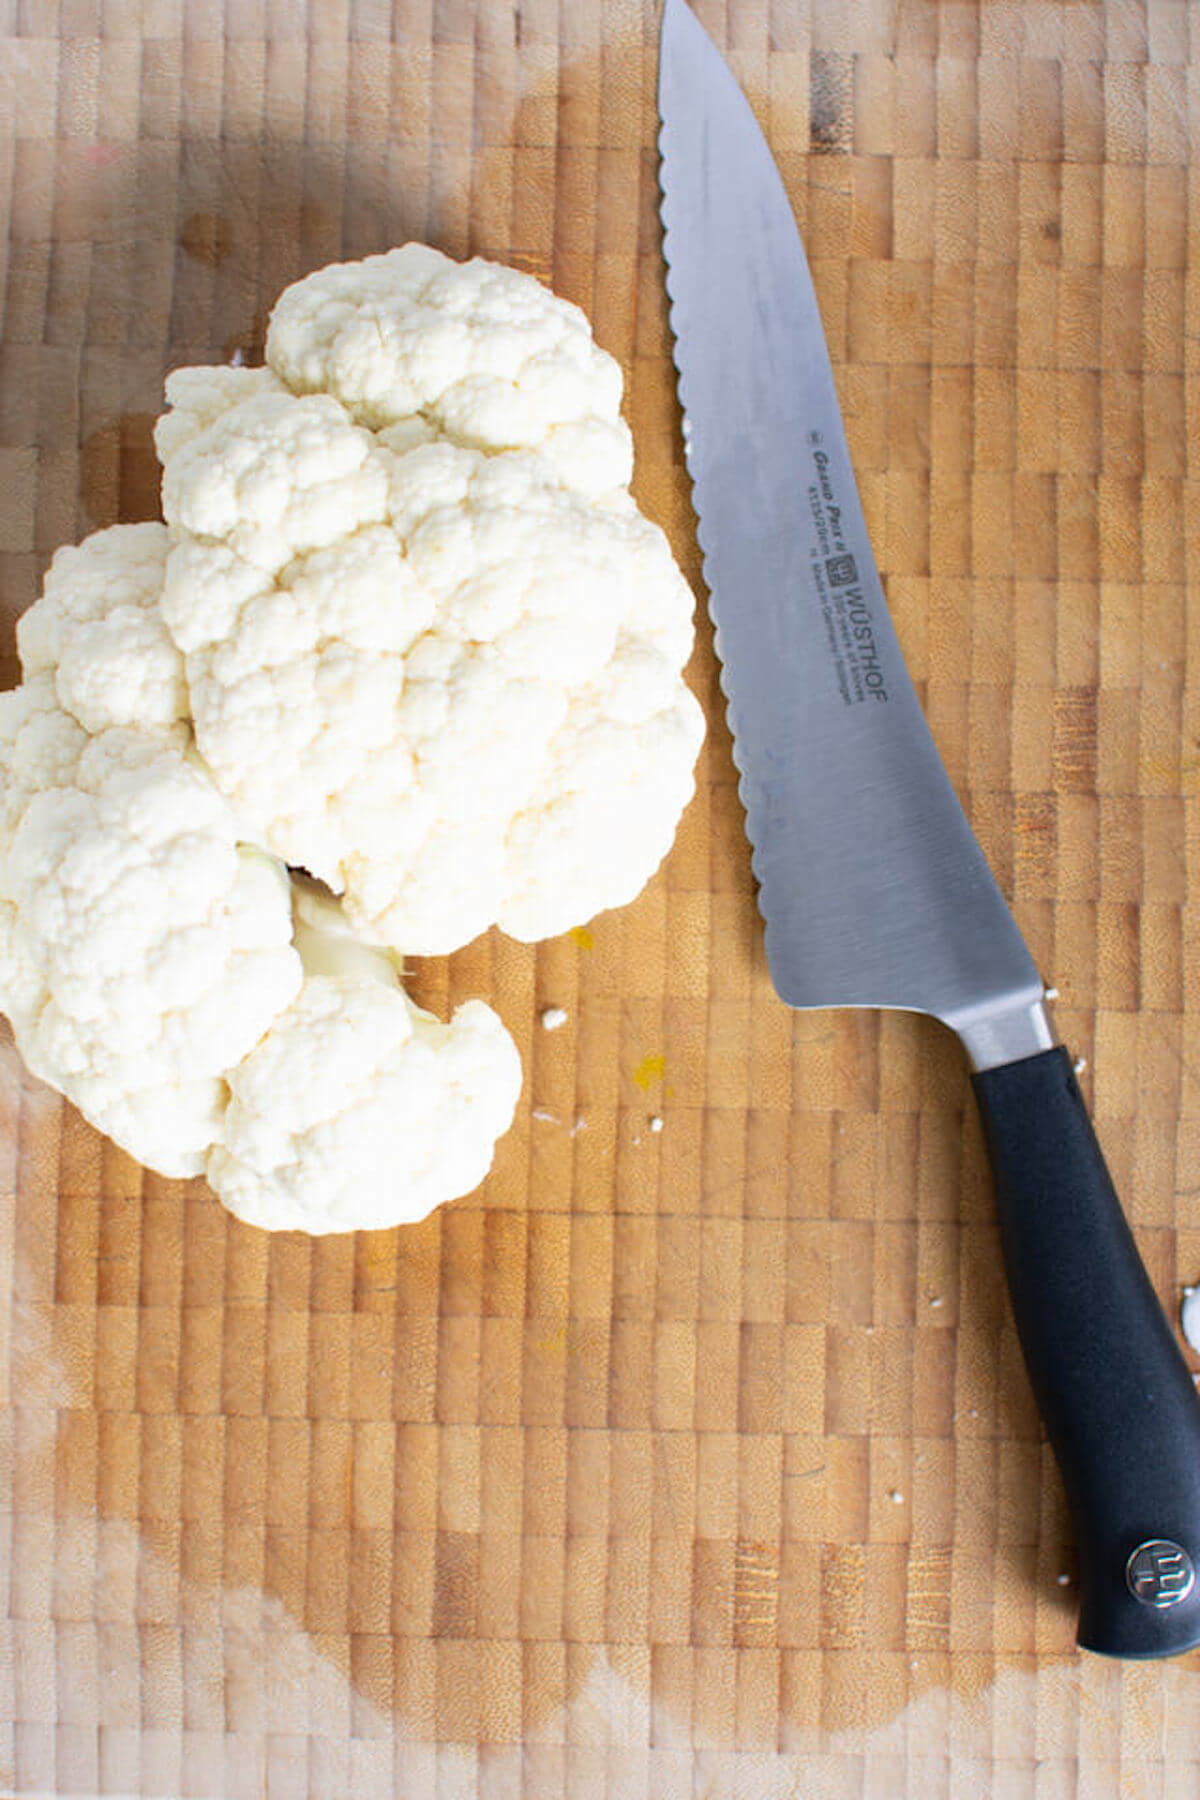 Cleaned and trimmed cauliflower on wooden cutting board with knife